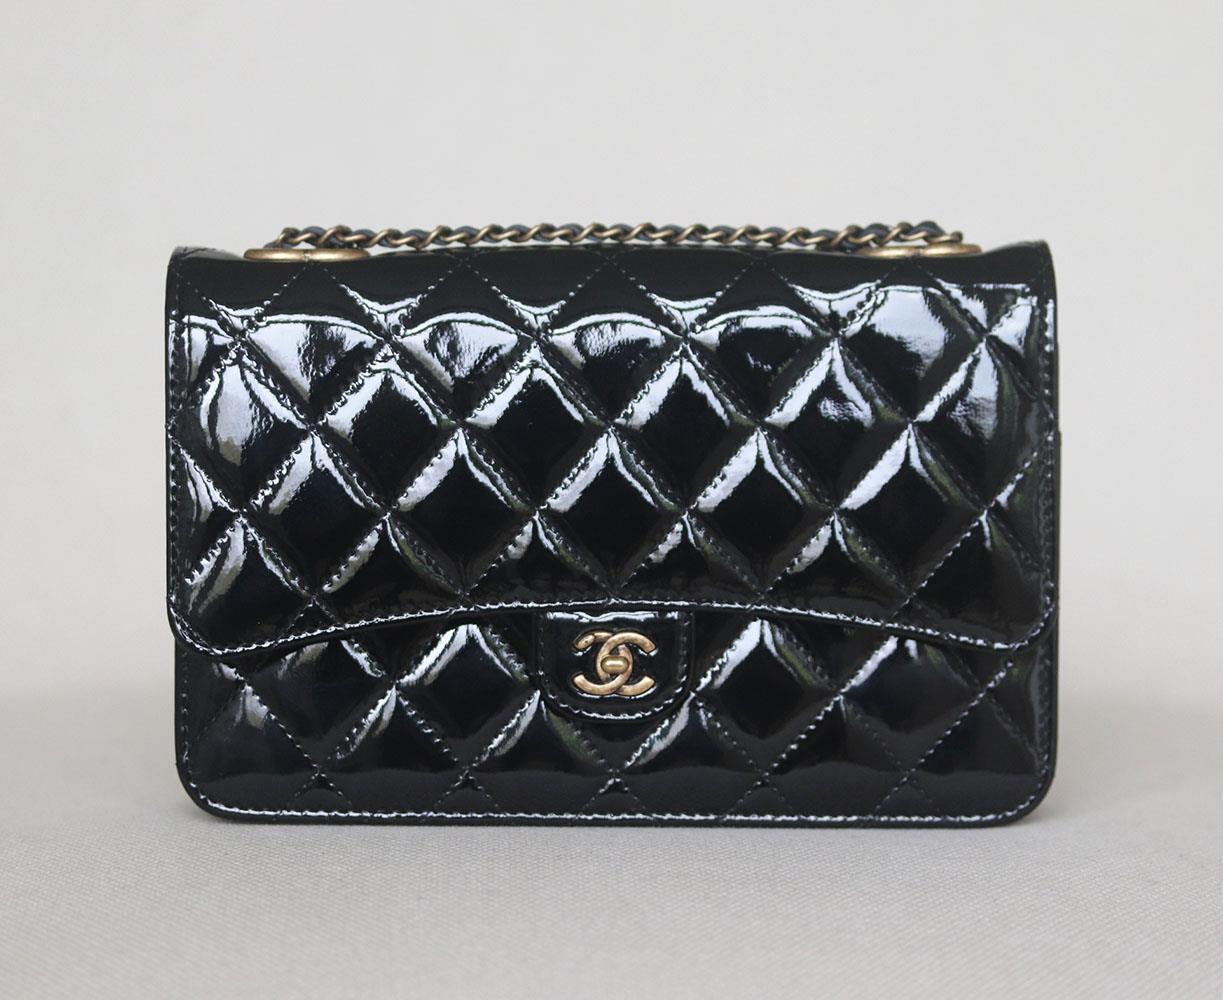 Chanel Quilted Patent-Leather Wallet on Chain Crossbody Bag has been hand-finished by skilled artisans in the label's workshop, it is boasting a quilted patent-leather exterior, this design is accented with antiqued gold-toned and black calfskin